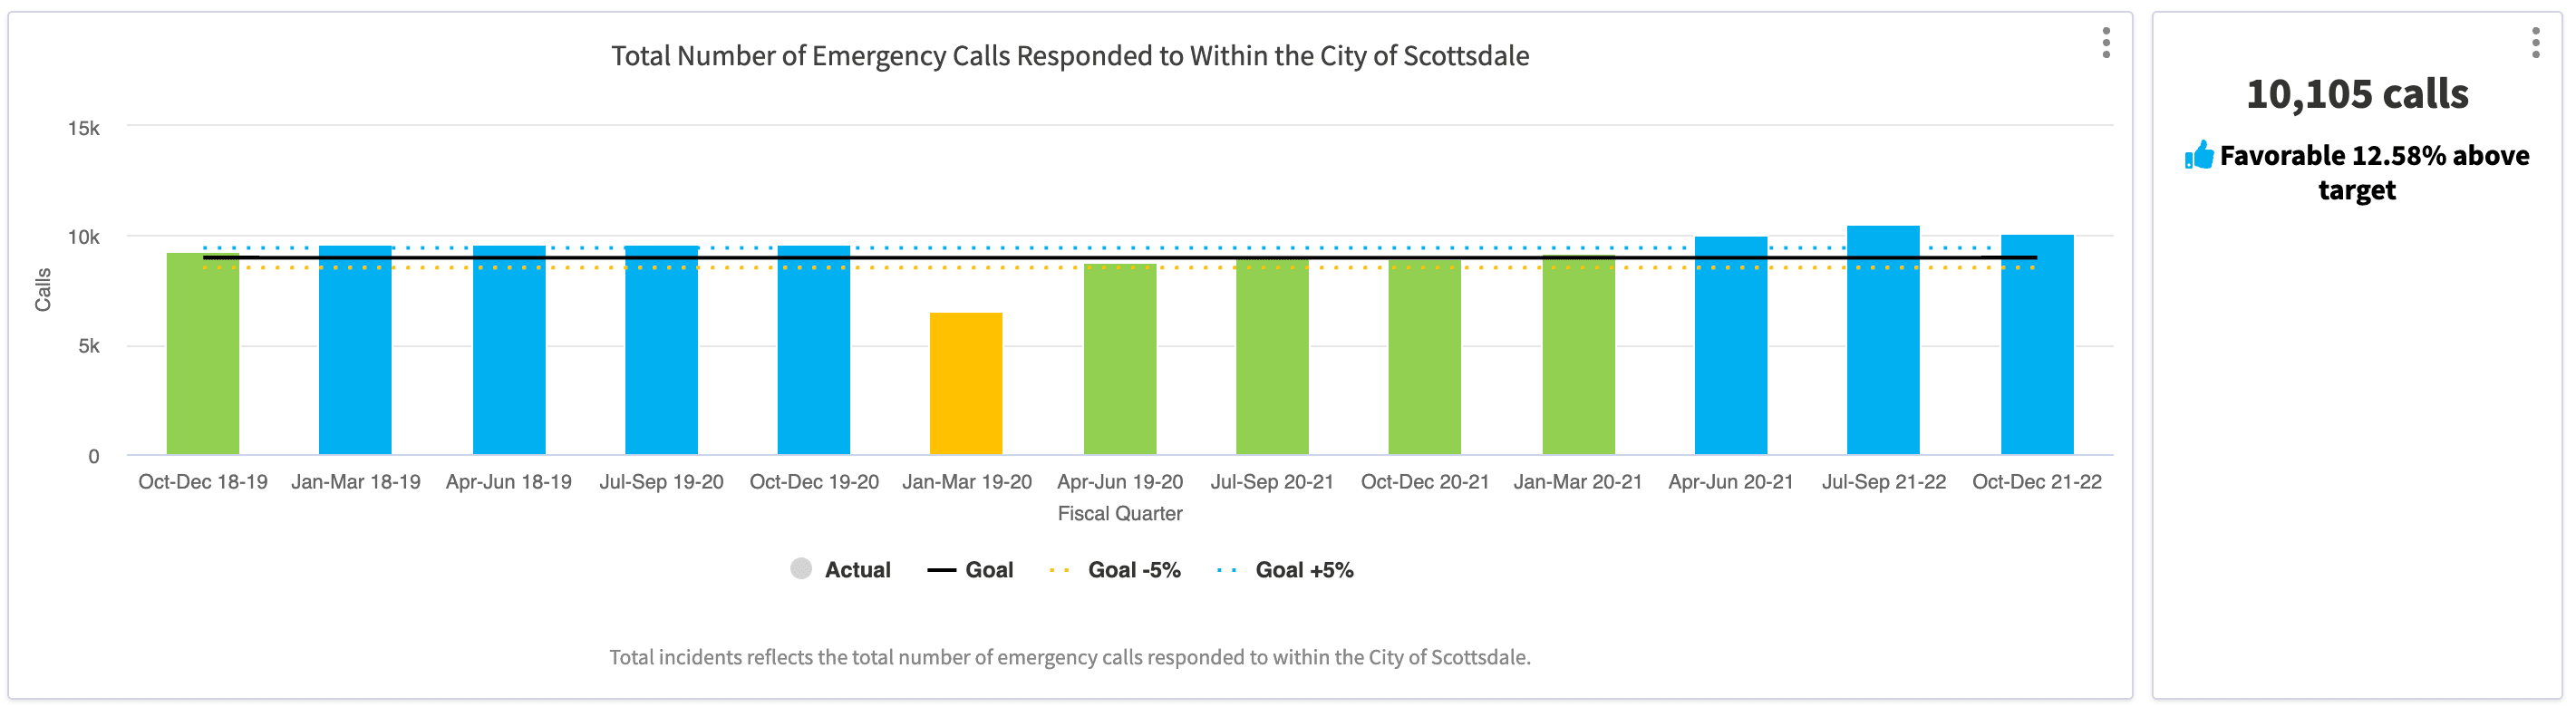 Screenshot of City of Scottsdale's number of emergency calls fire department performance measures chart